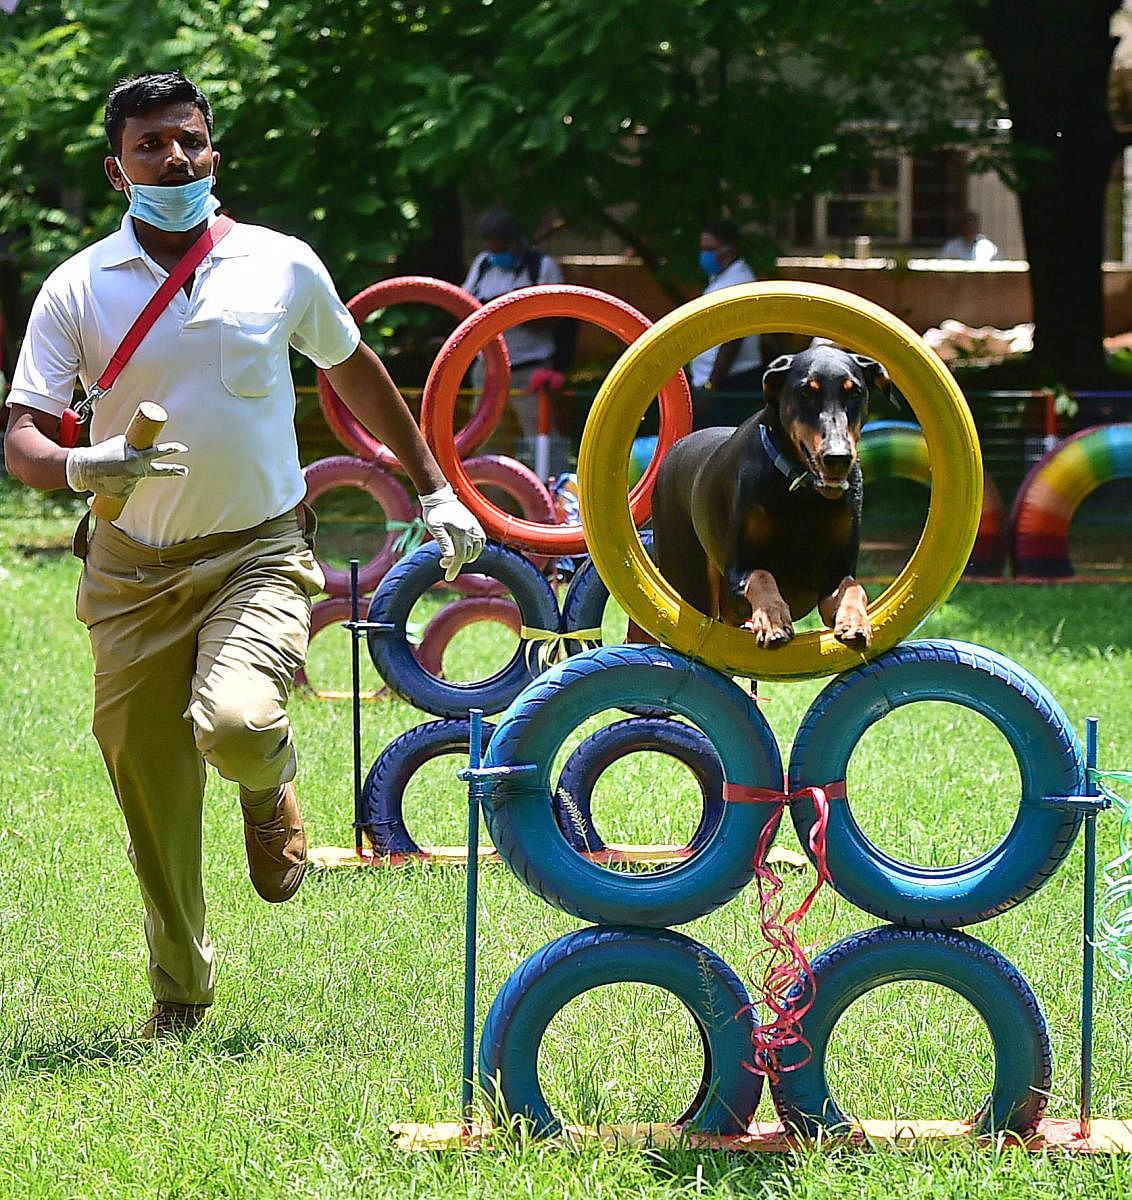 A police dog showcases its skills while its handler runs after it in Adugodi on Tuesday. DH PHOTO/RANJU P